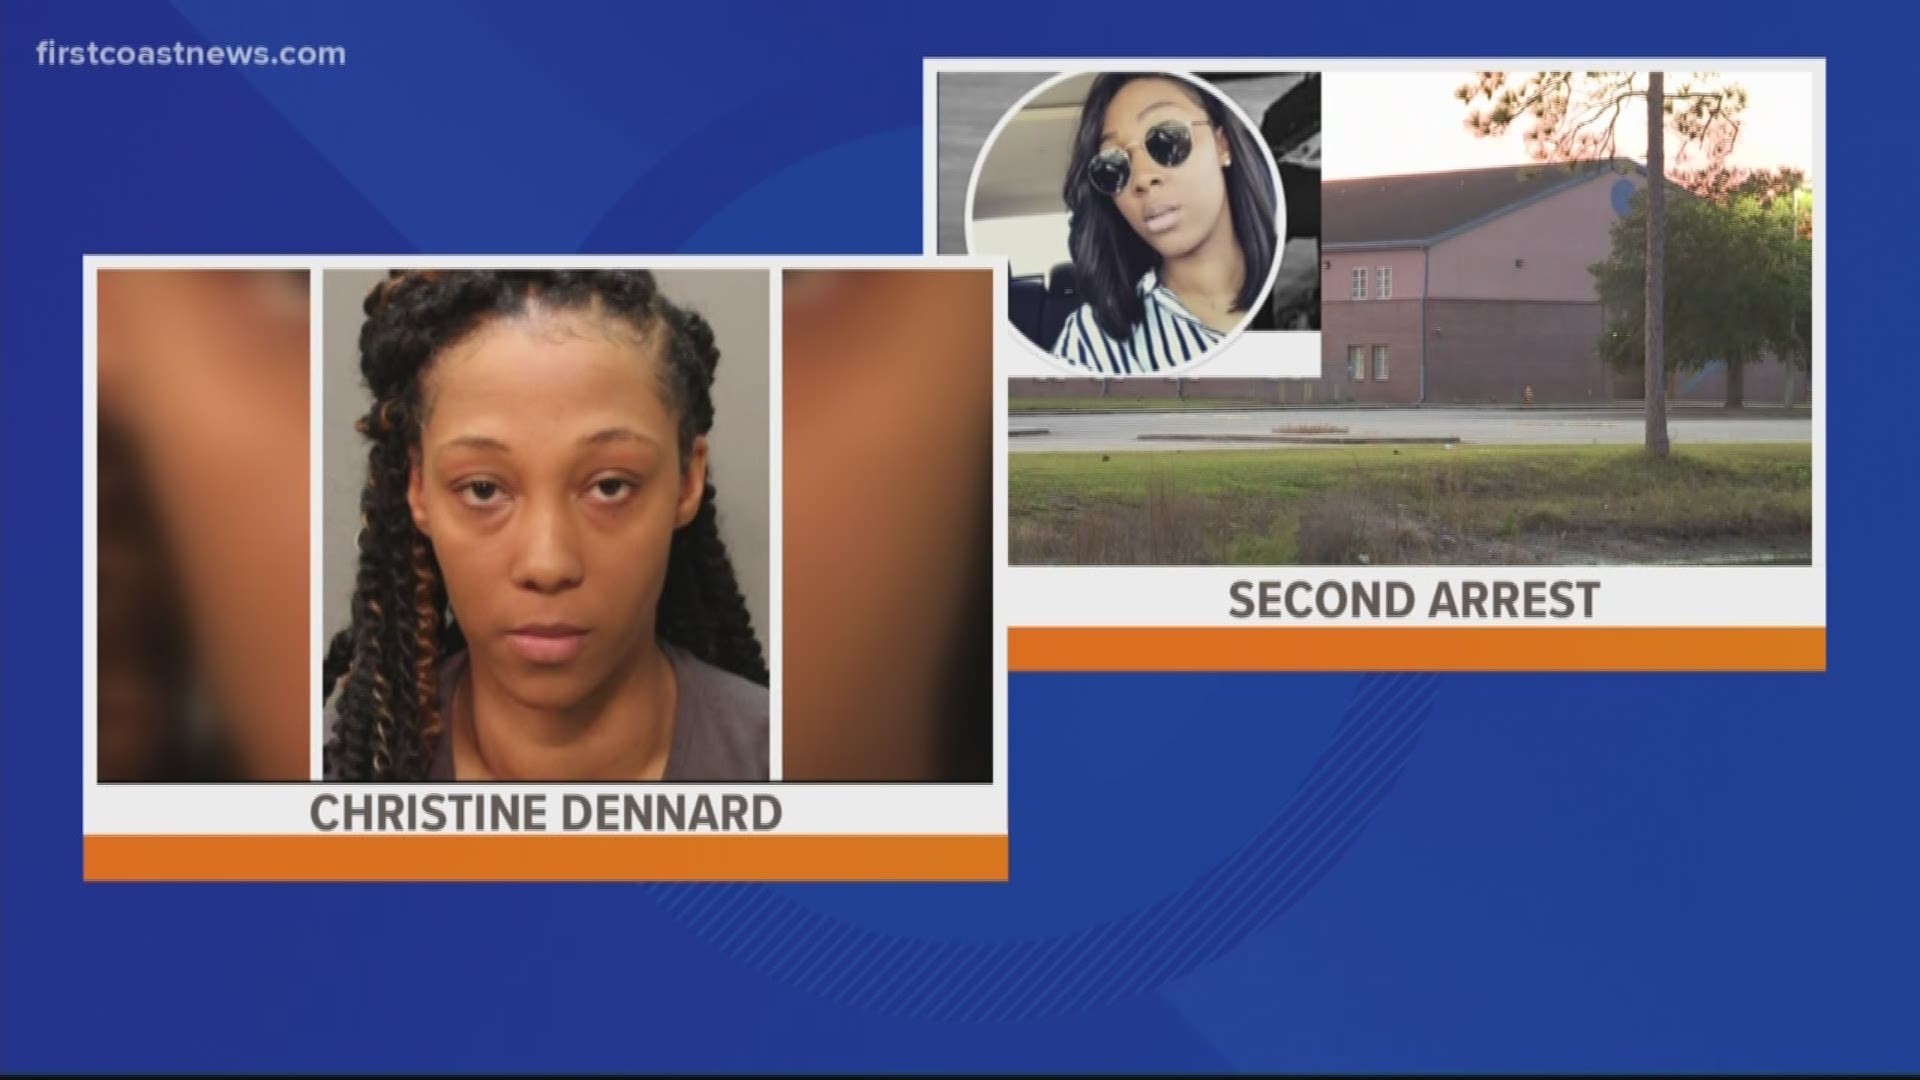 Christine S. Dennard was arrested back in November and charged with five counts of unlawful sexual activity with a 16 or 17-year-old victim.